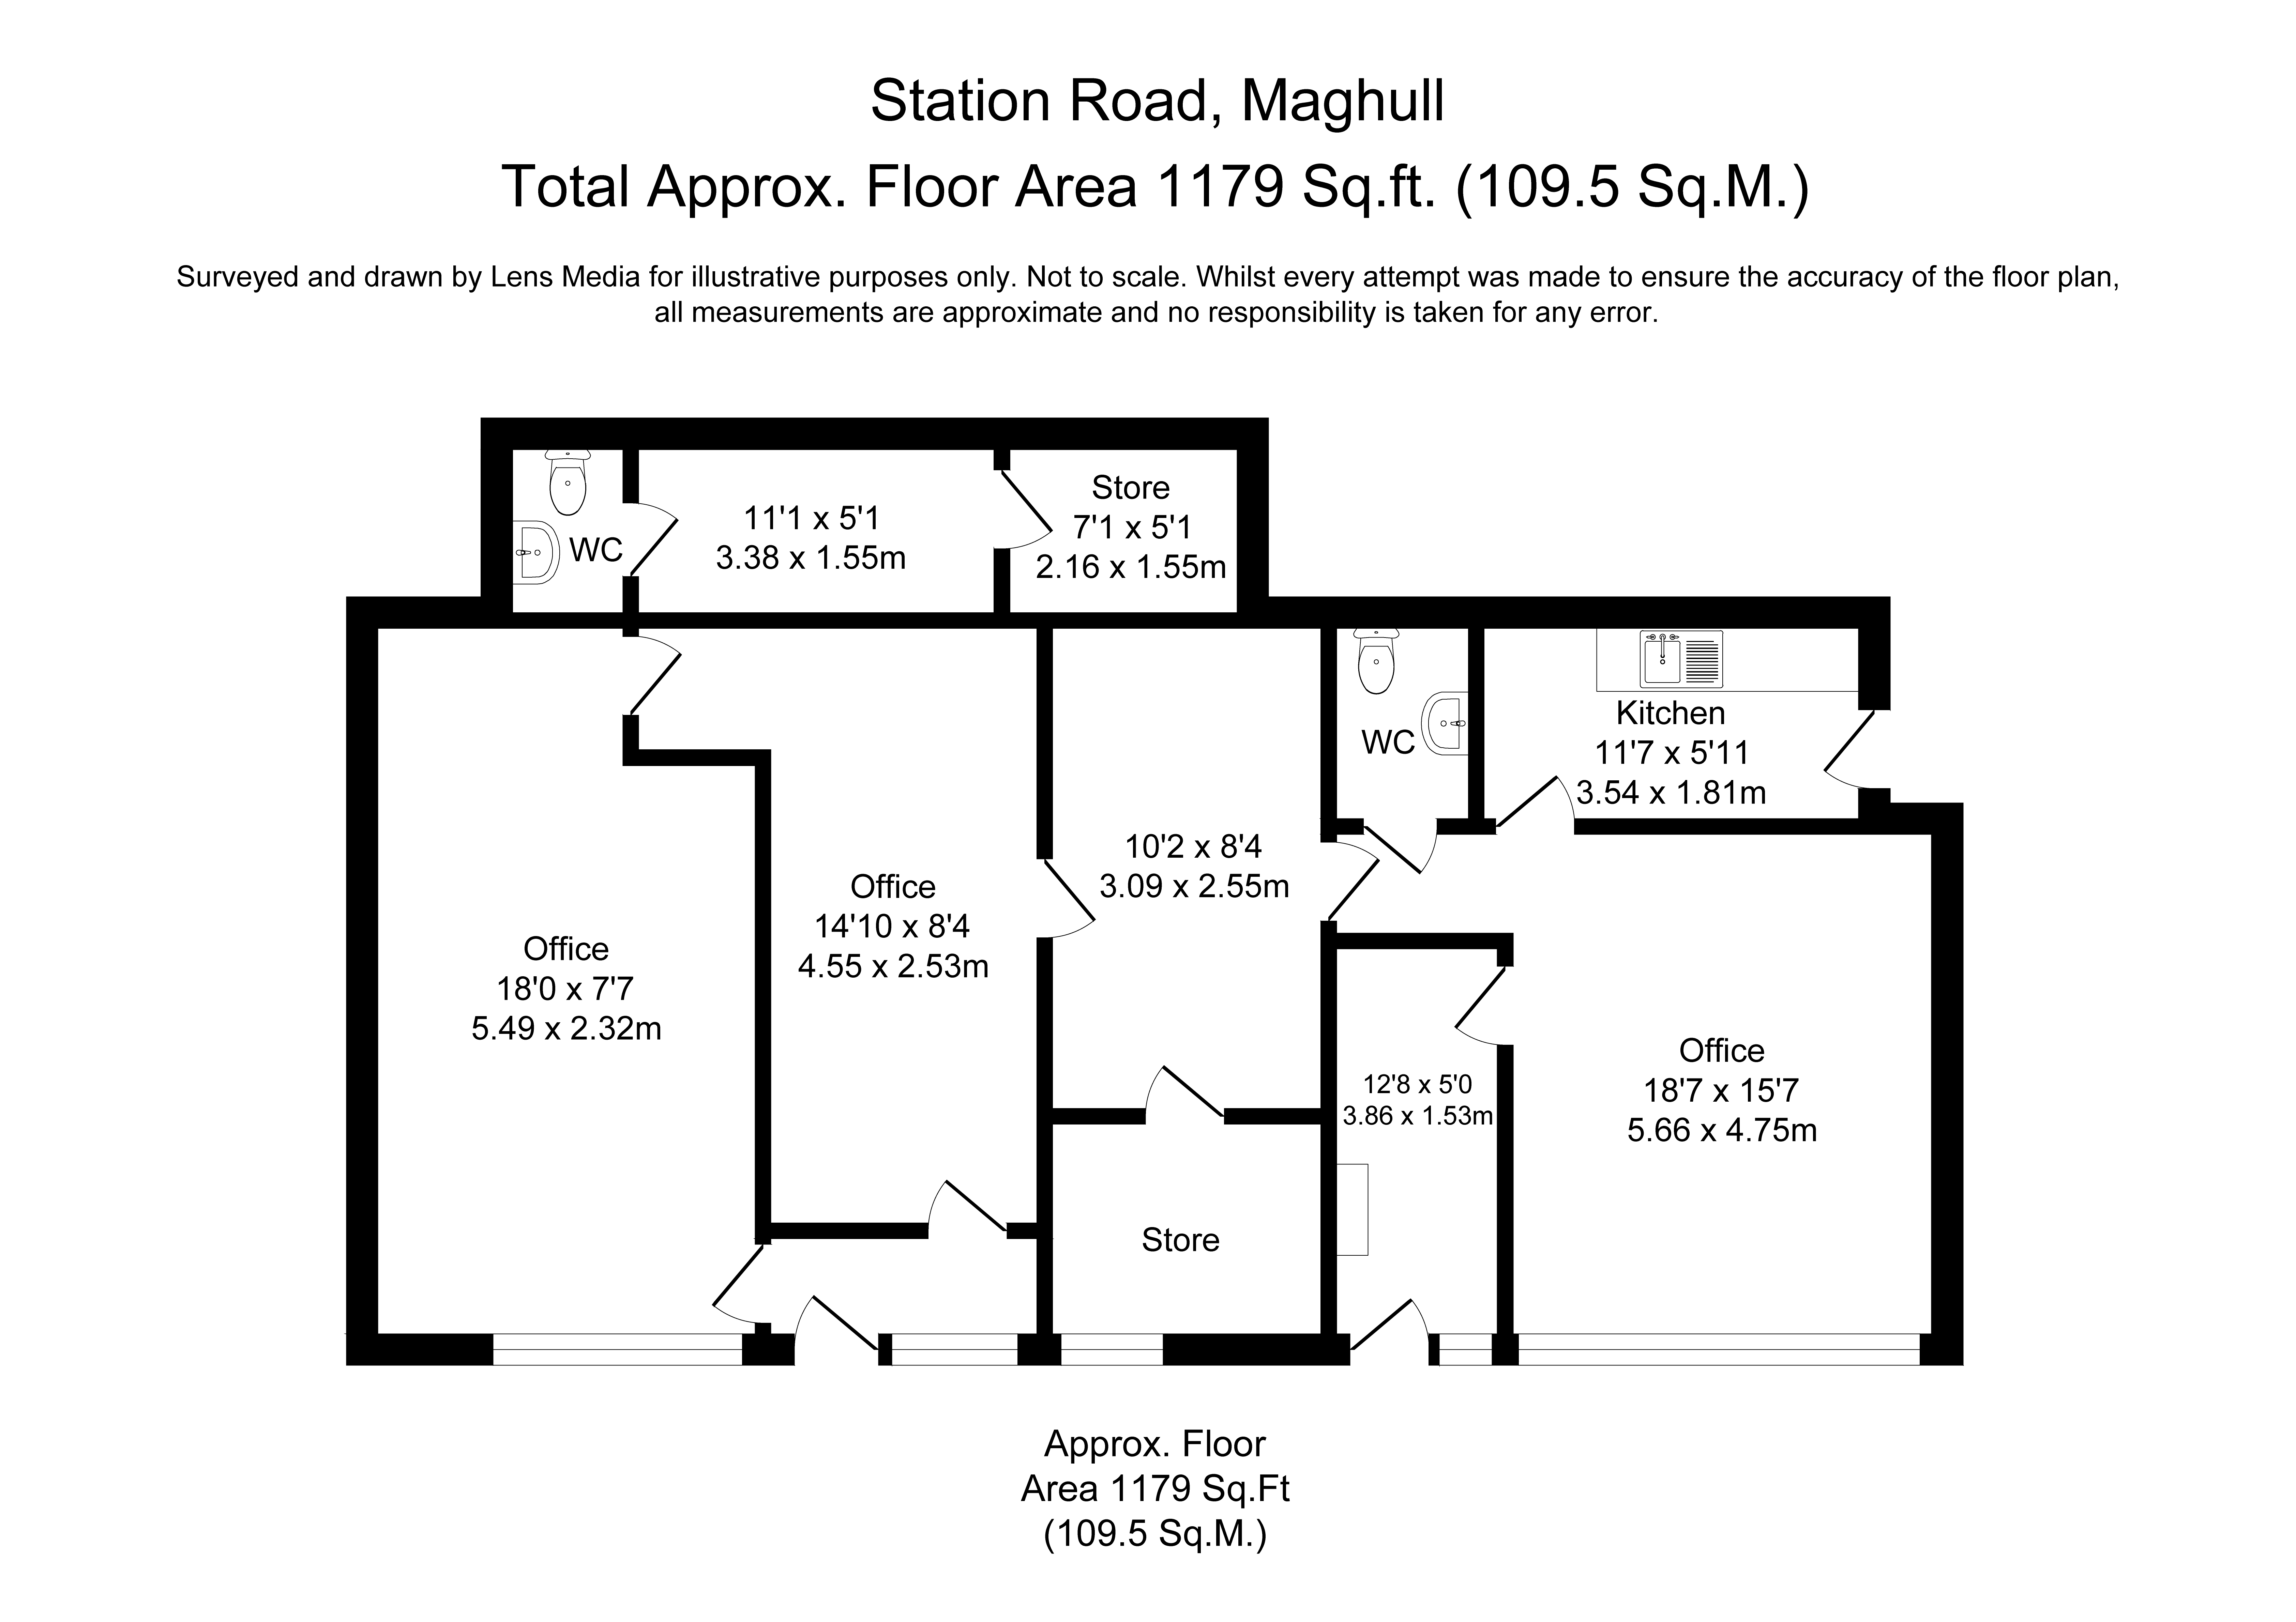 Floorplans For and 56 Station Road, Maghull